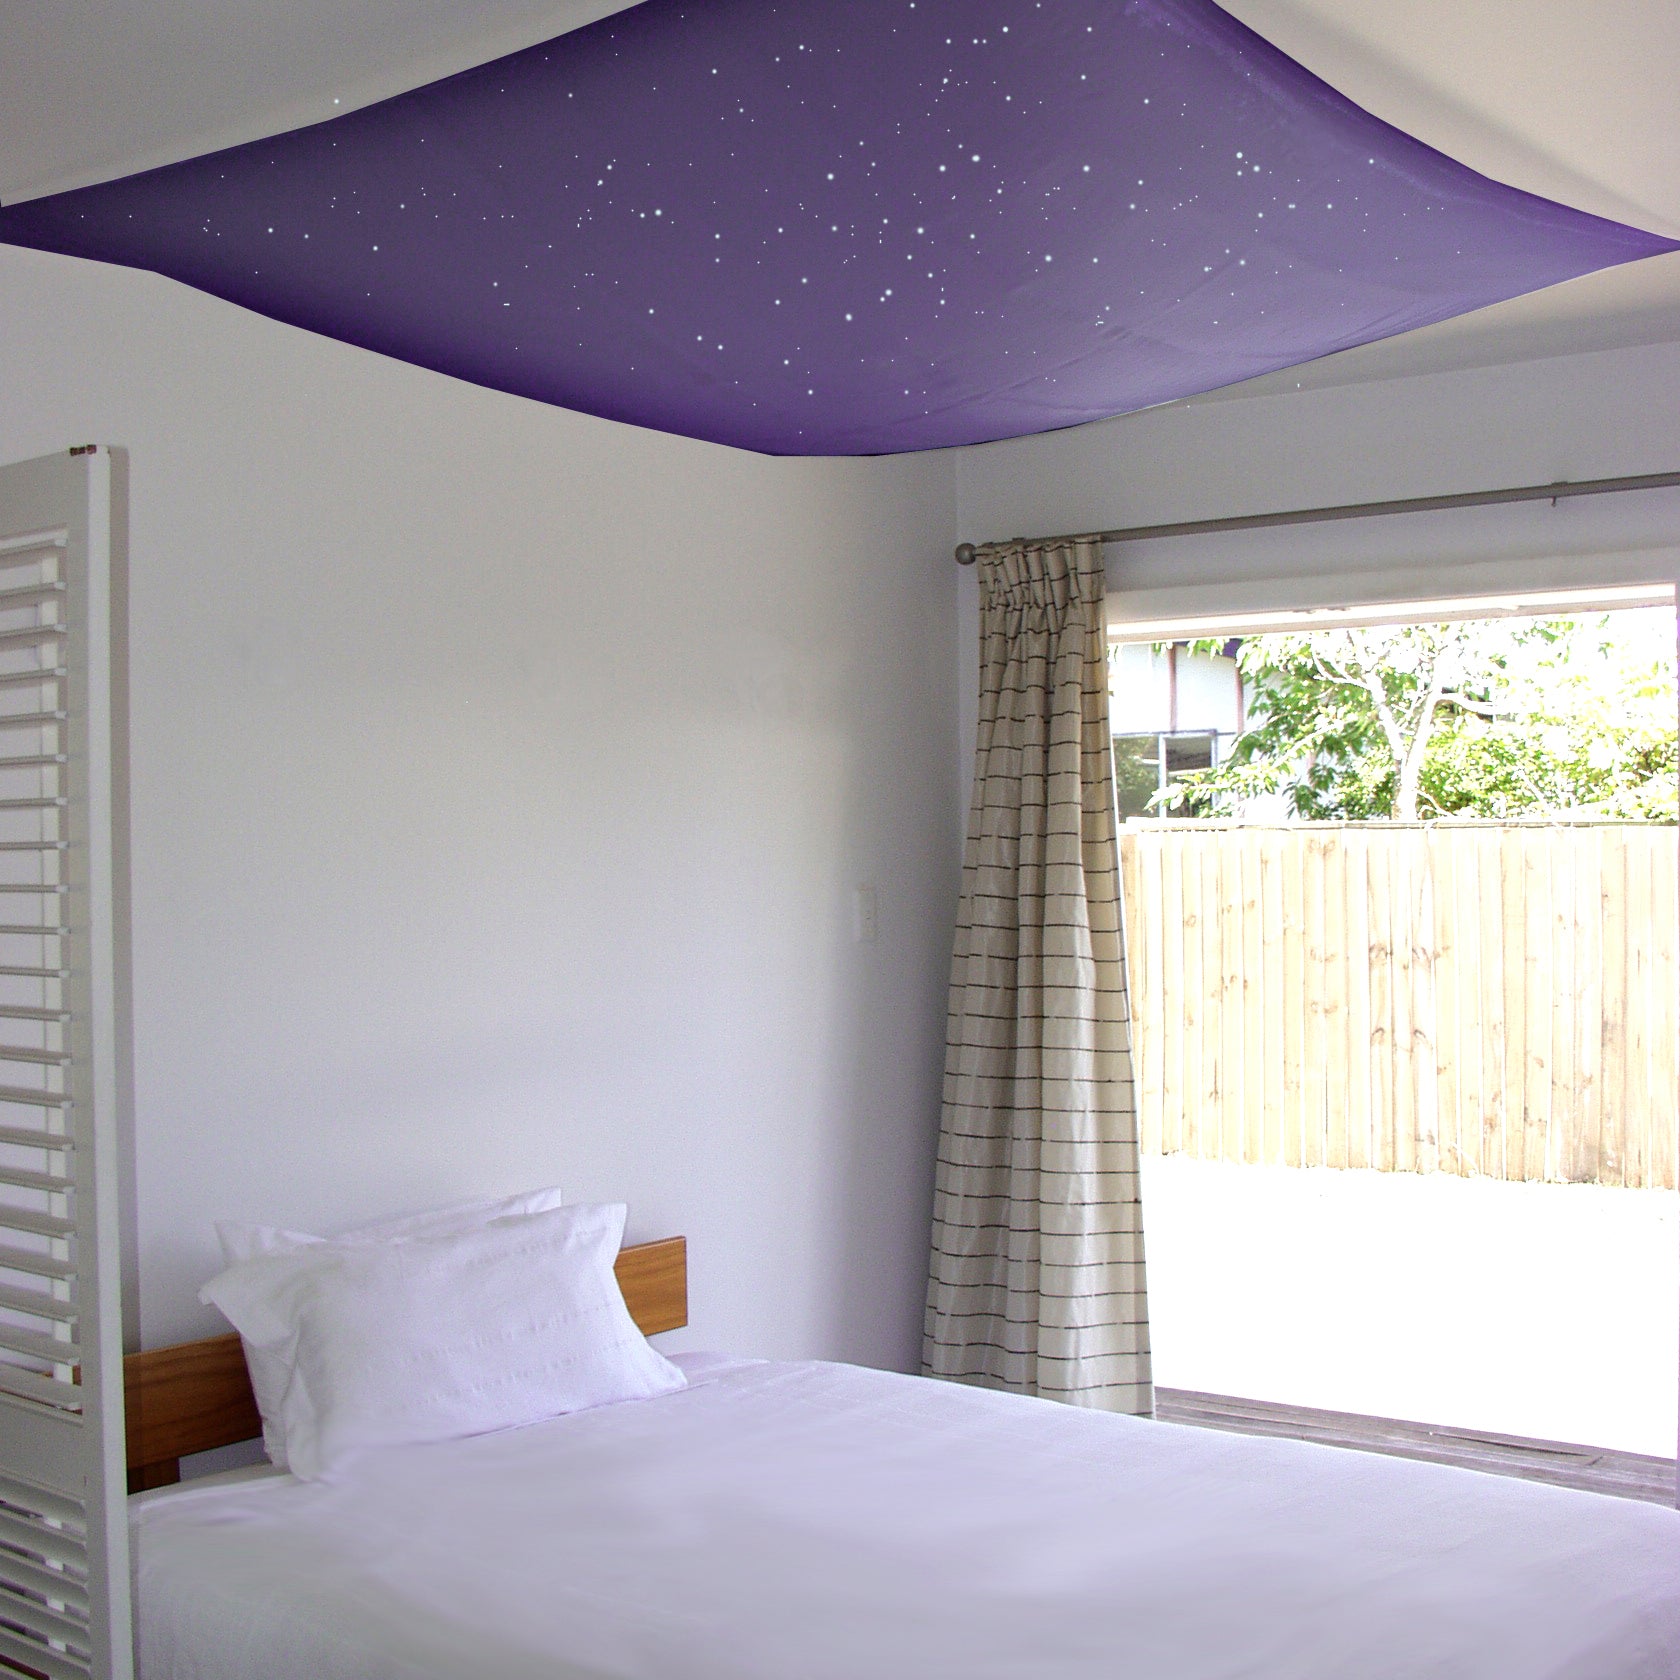 purple or lilac colour glow in the dark fabric, handpainted with stars